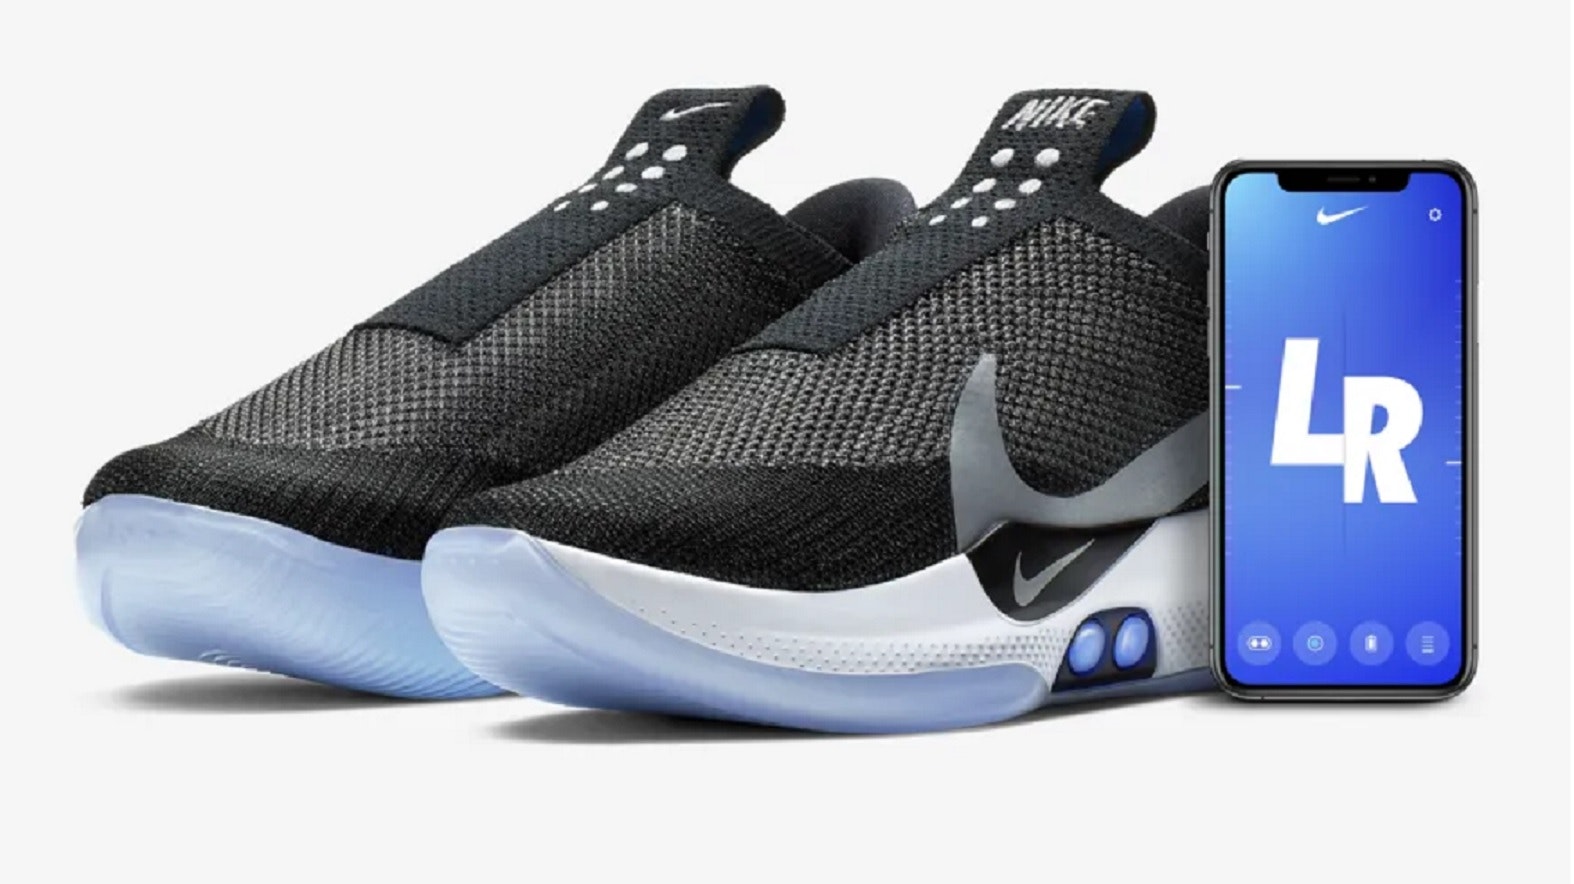 Inquieto desconcertado mensual Nike confirms $350 Adapt BB 'connected shoes' with smartphone control -  Tech Digest